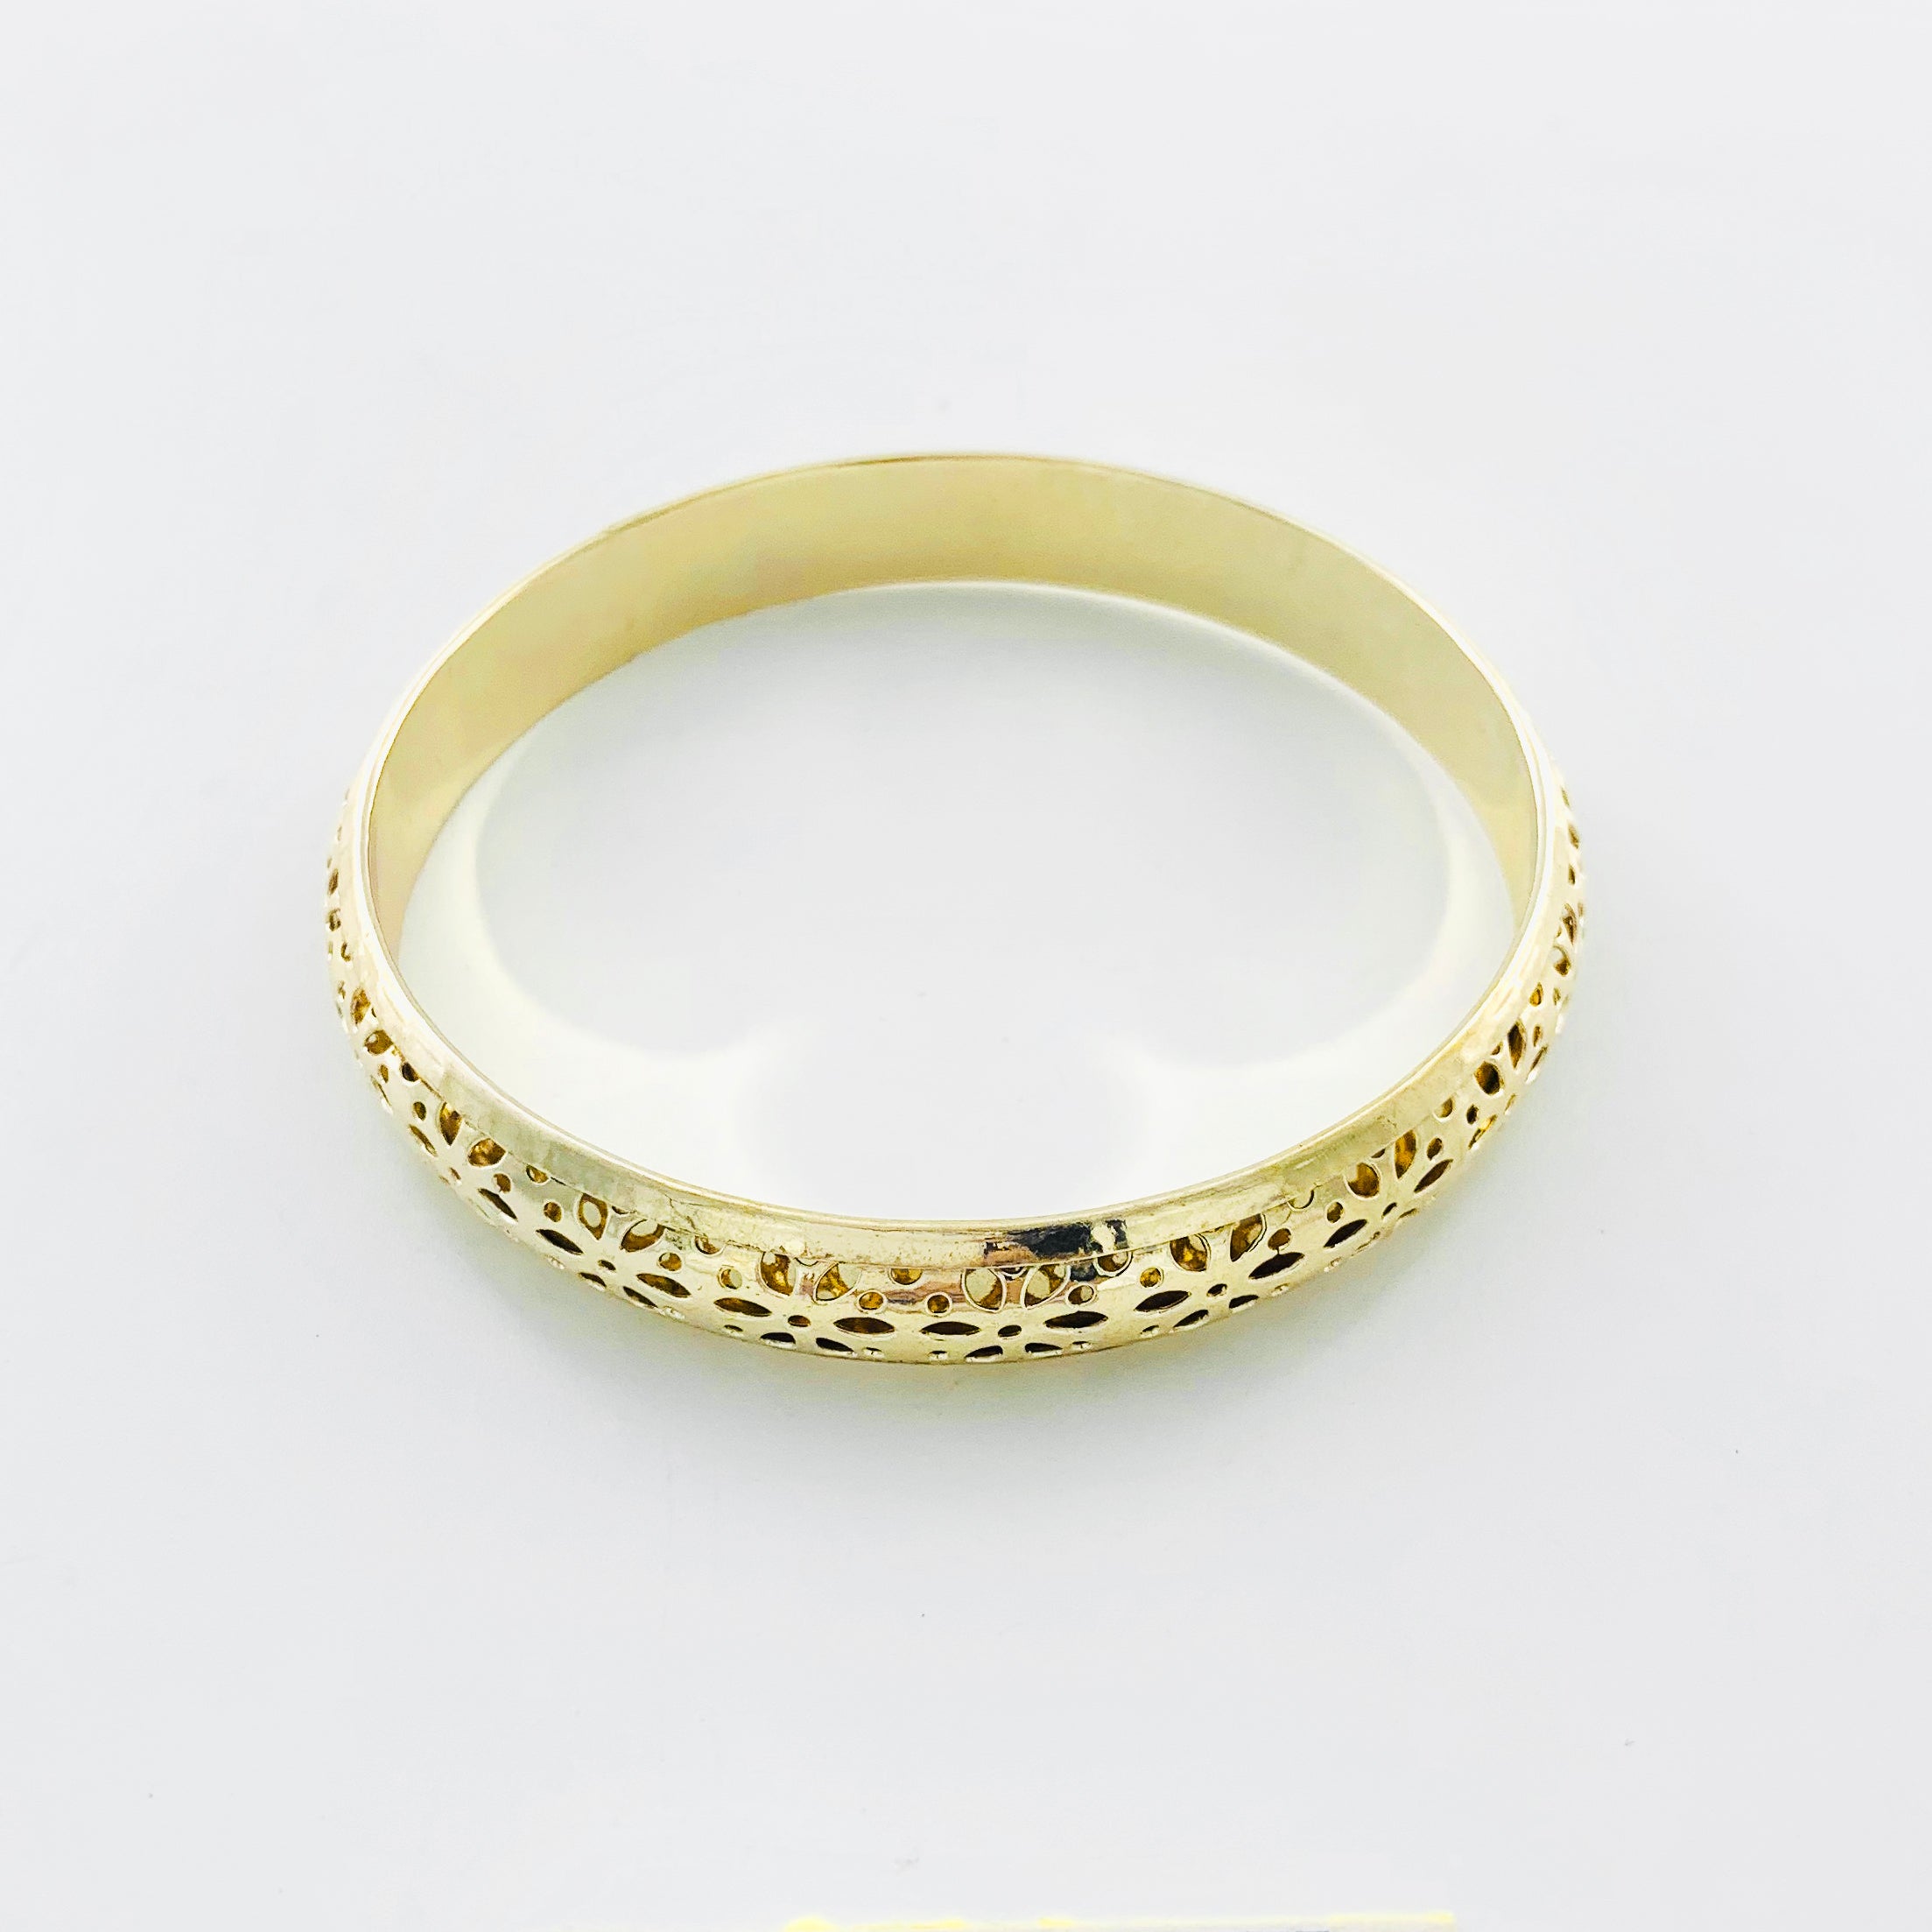 Gold bangle with floral cut-out patterns